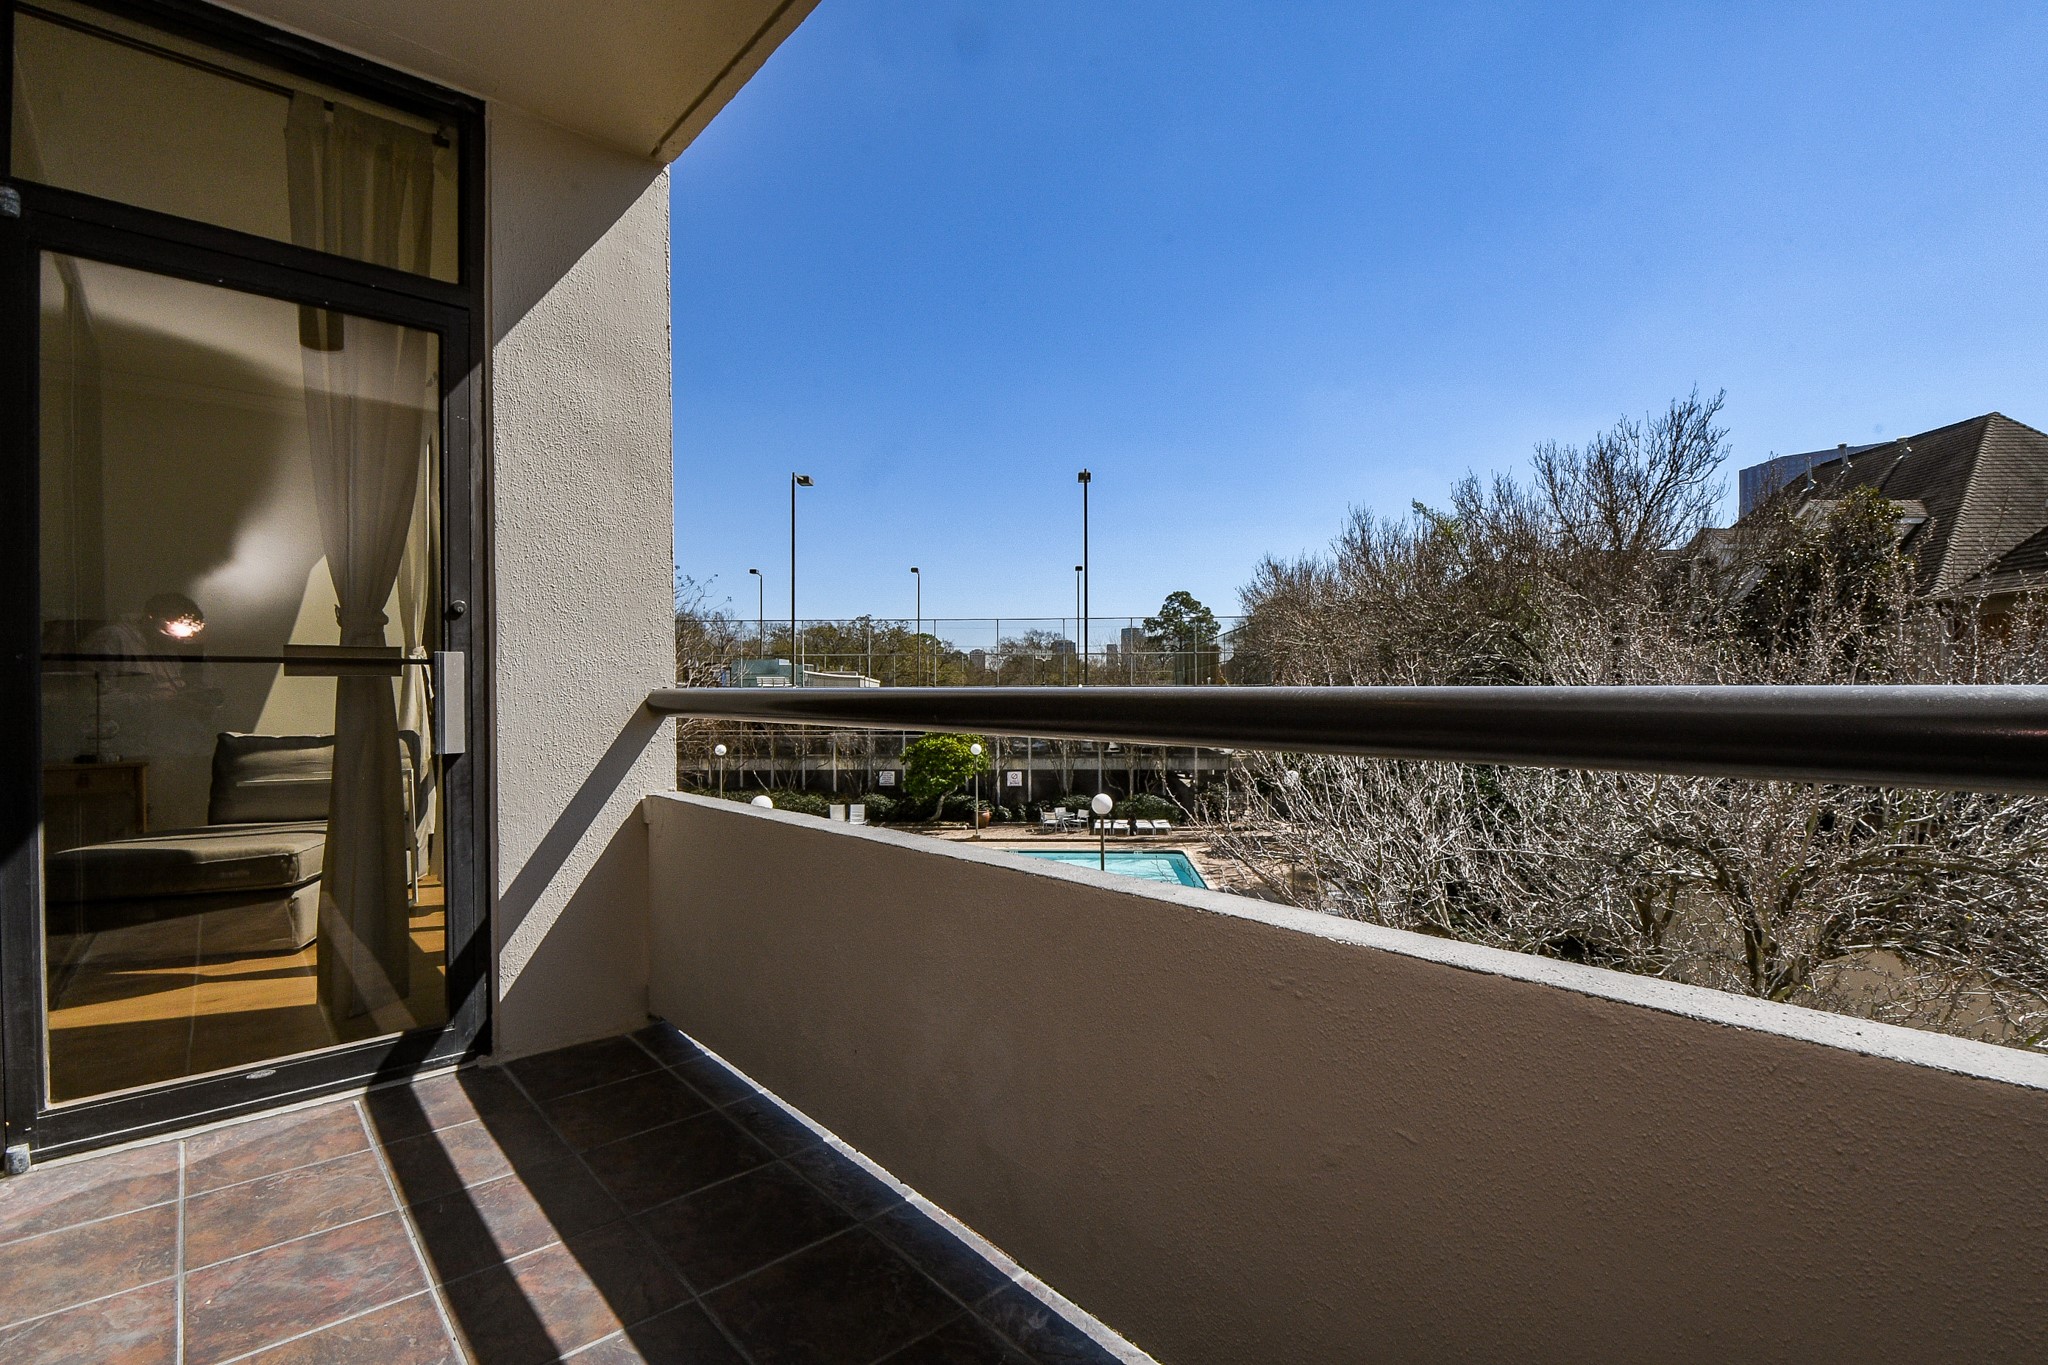 With convenient access to your private balcony overlooking the sparking pool.